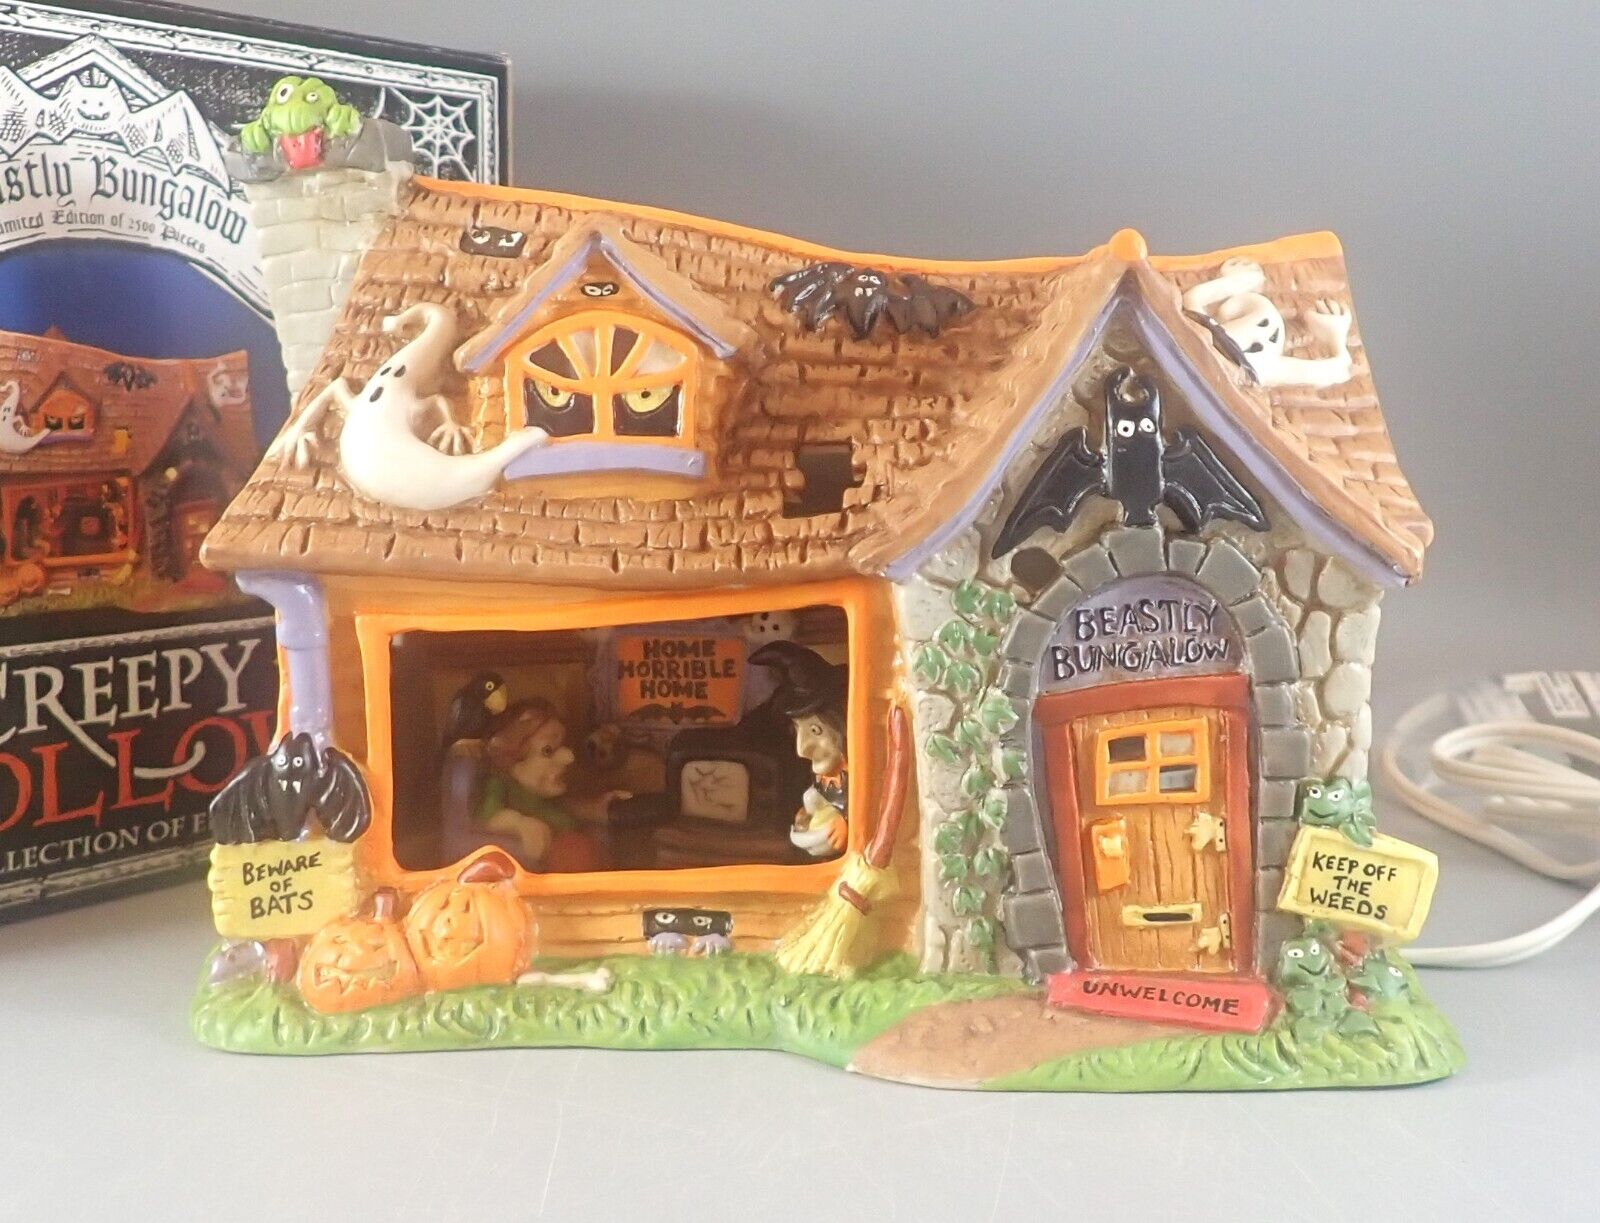 Creepy Hollow Beastly Bungalow Ltd Edition Halloween NIB Midwest of Cannon Falls